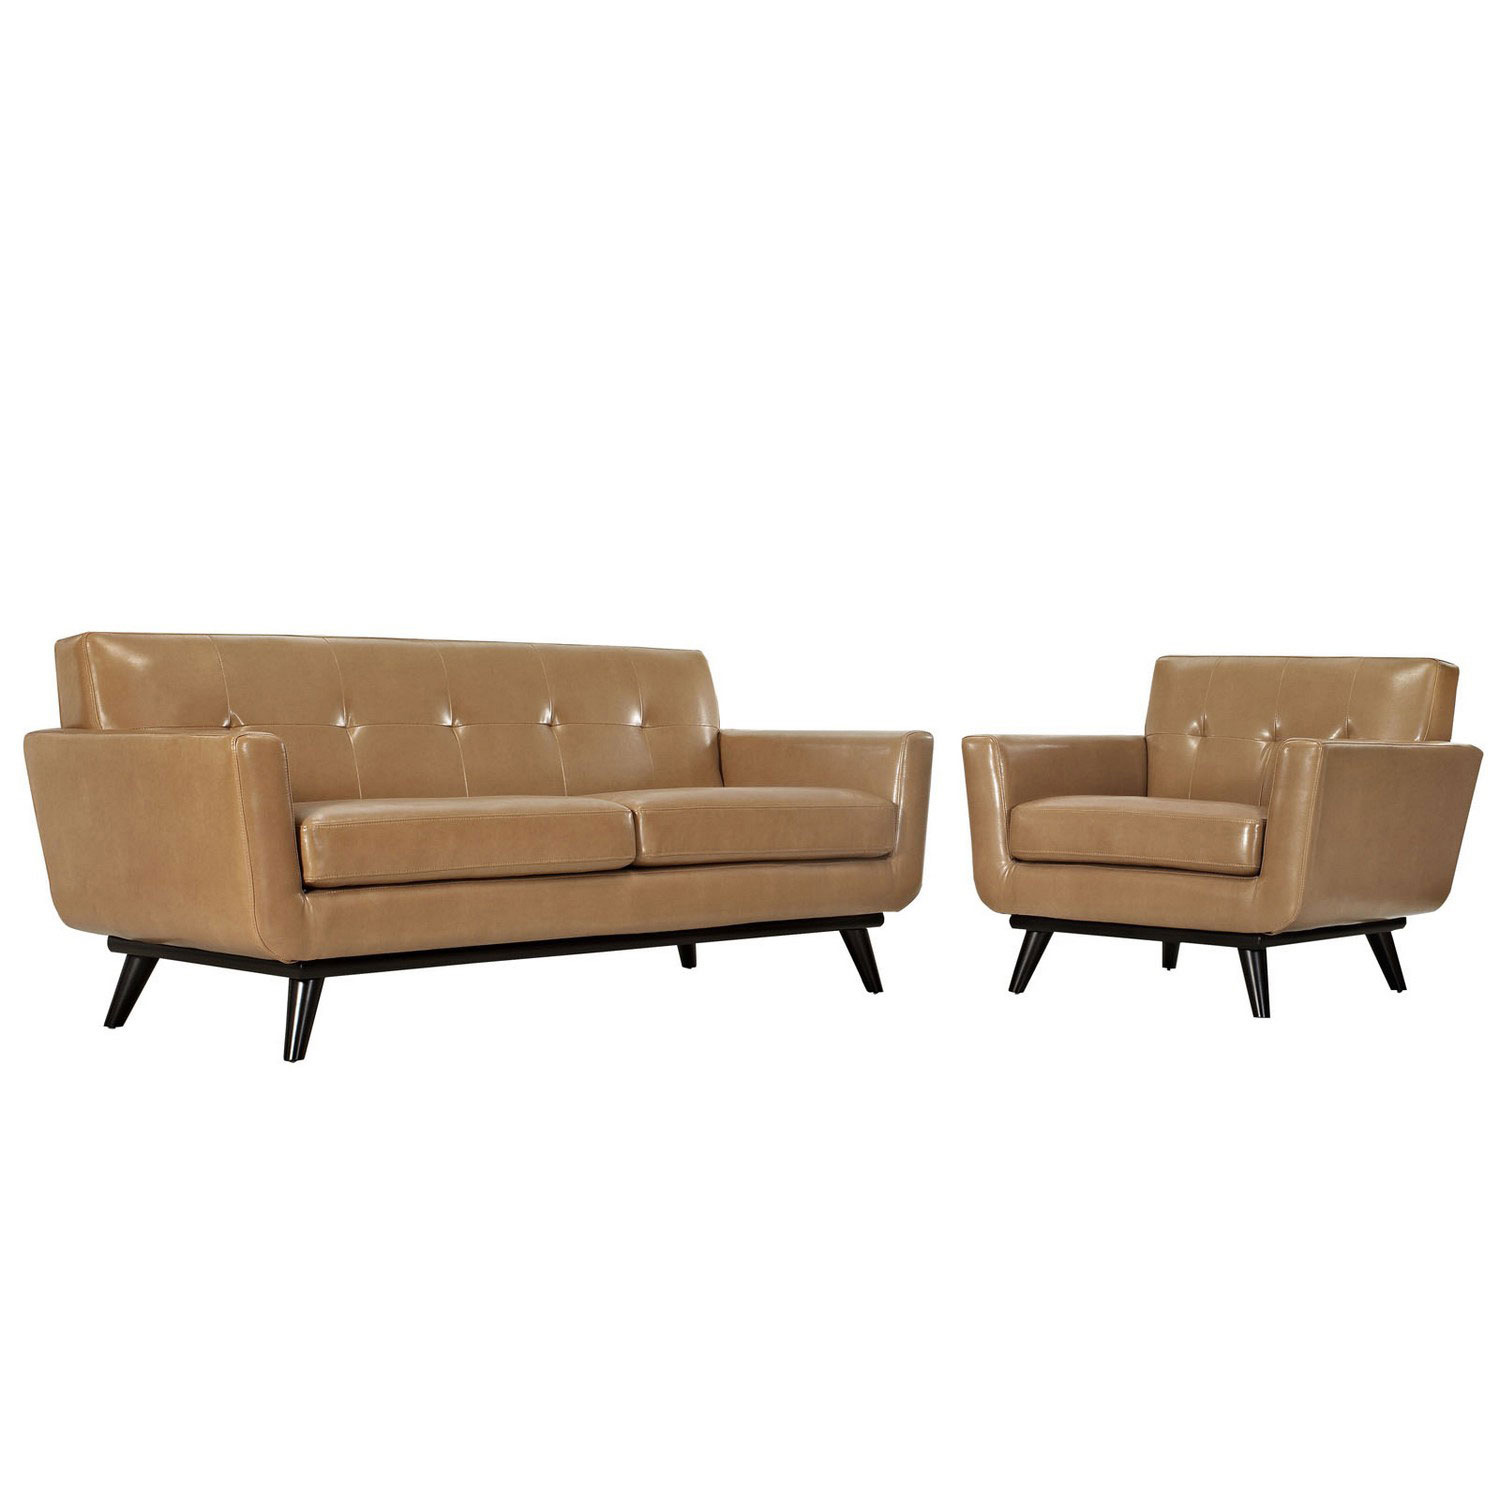 Modway Engage 2 Piece Leather Living Room Set - Tan